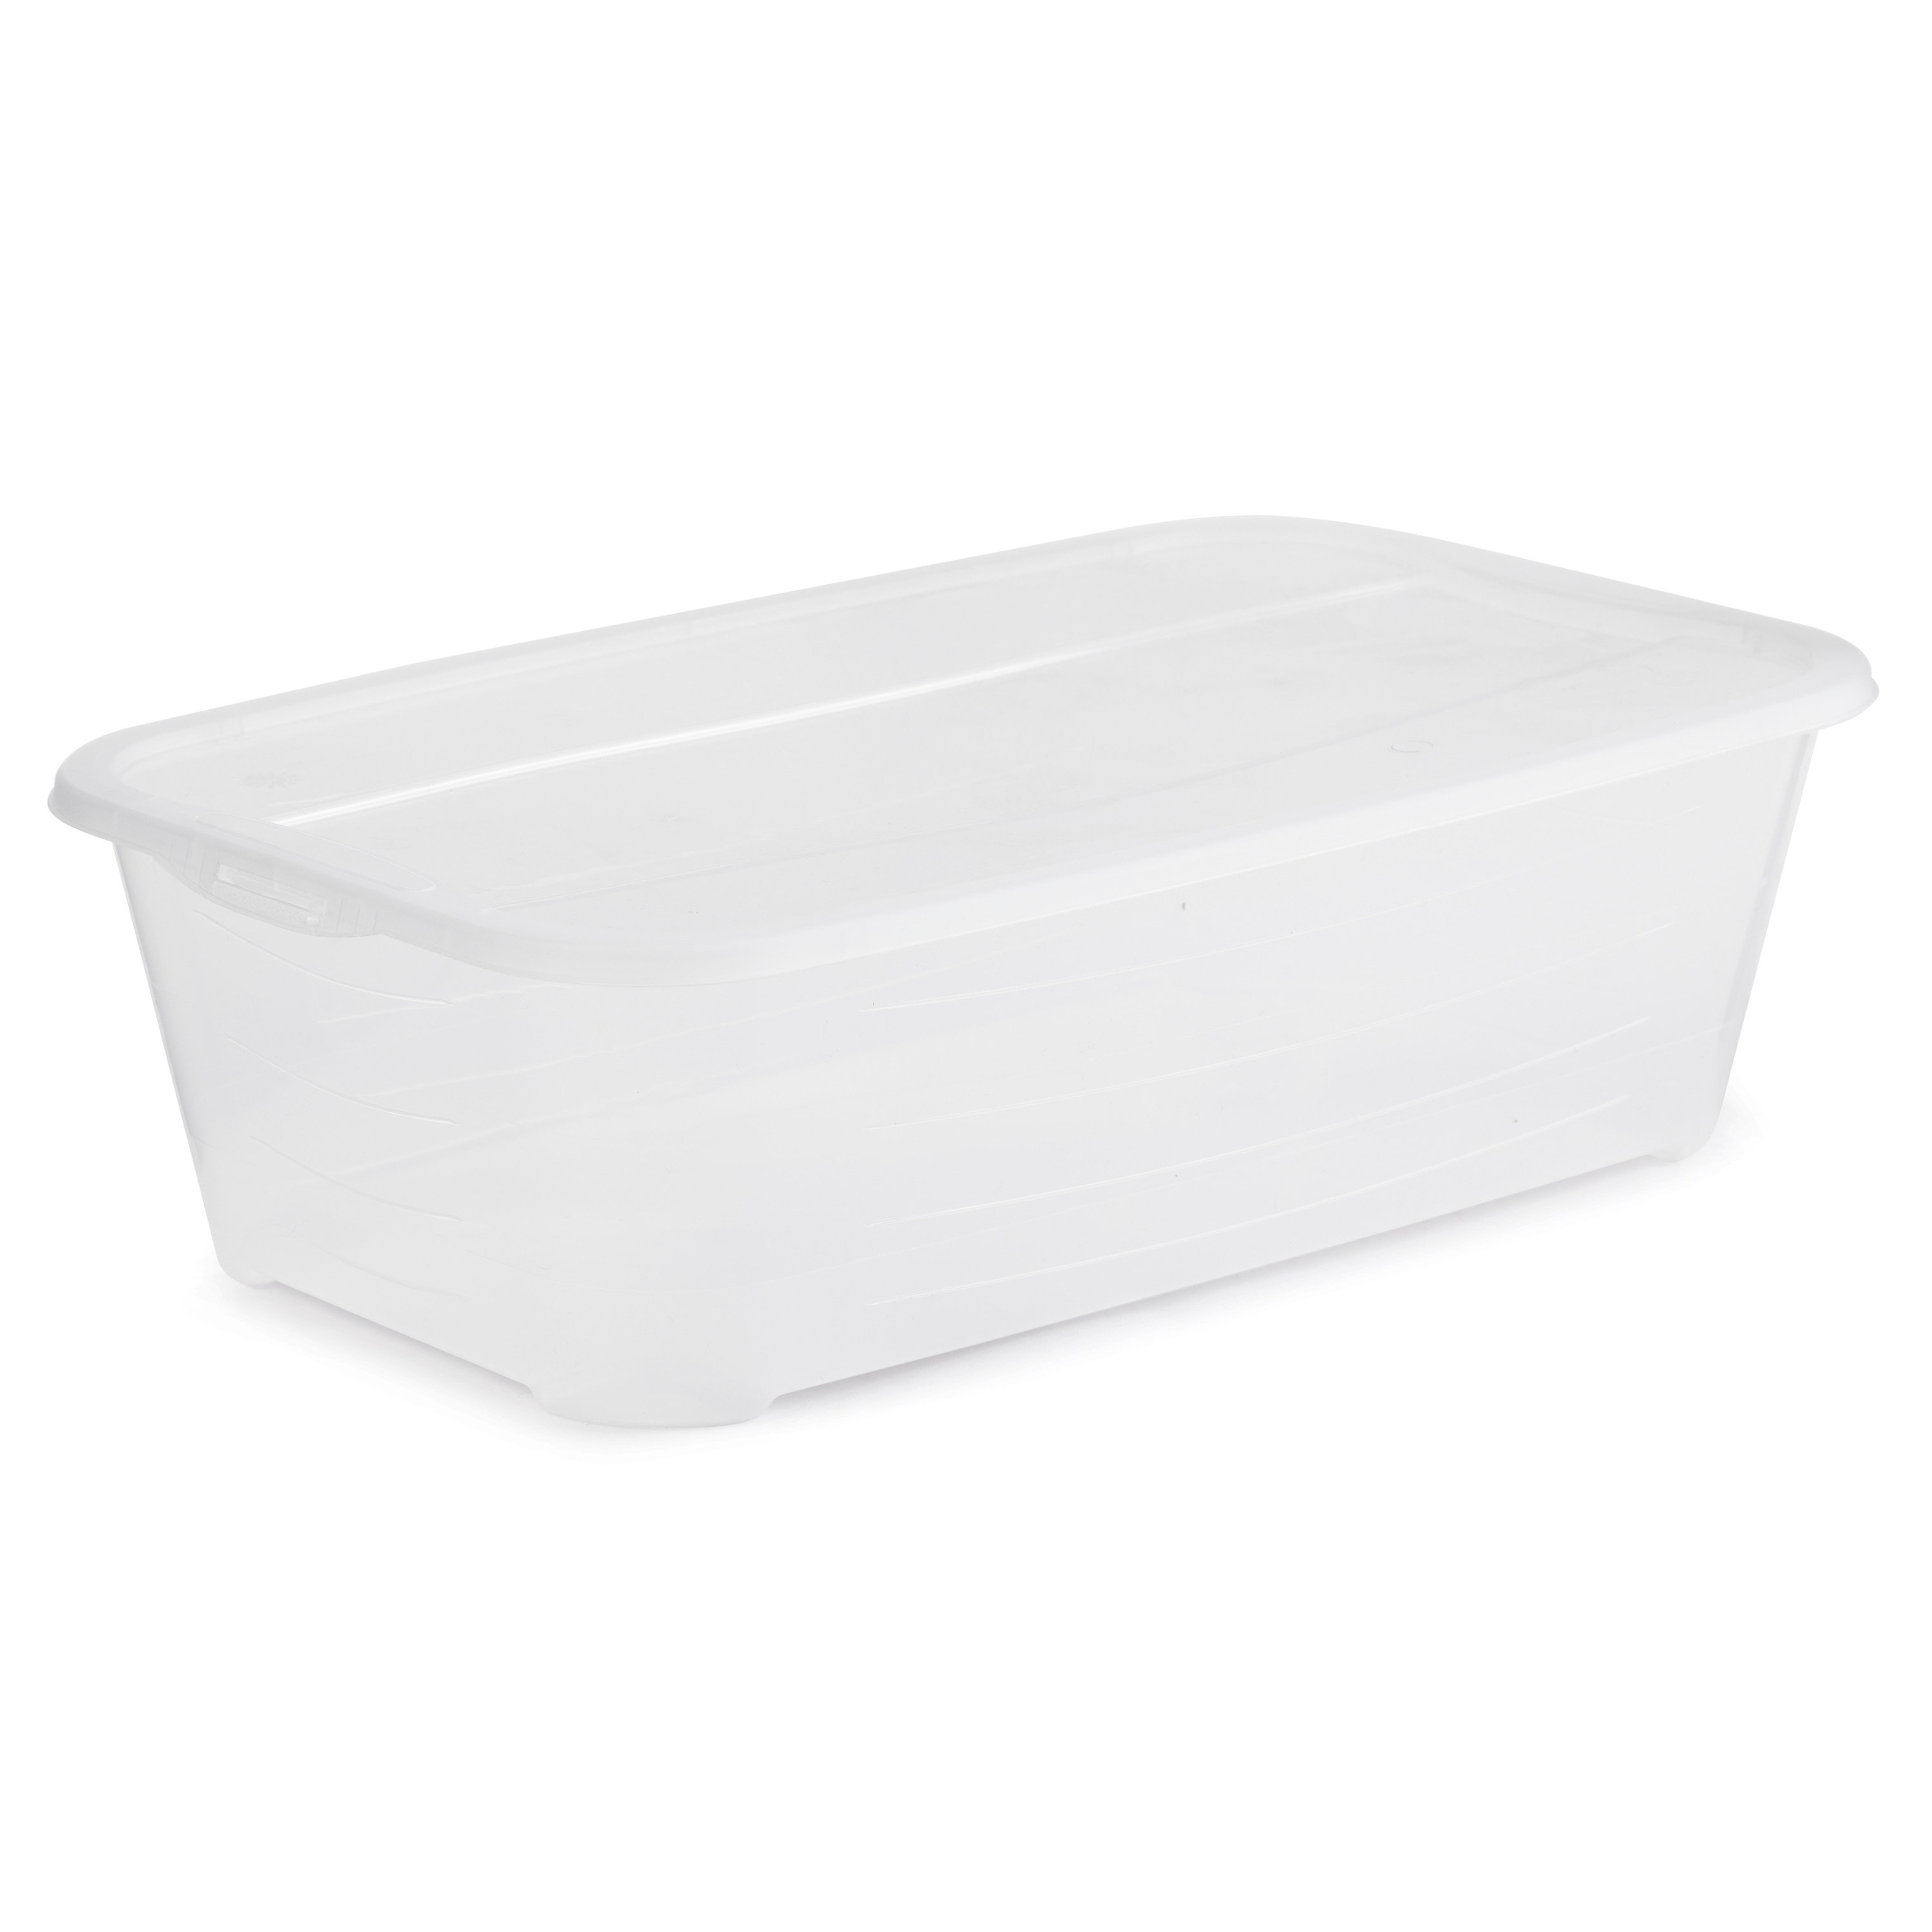 https://ak1.ostkcdn.com/images/products/is/images/direct/bb0c6a6dd197bce4c77d2dbc6d3f499c90b85639/Life-Story-6-Quart-Stacking-Storage-Box-Bin-Clear-Container-with-Lid%2C-36-Pack.jpg